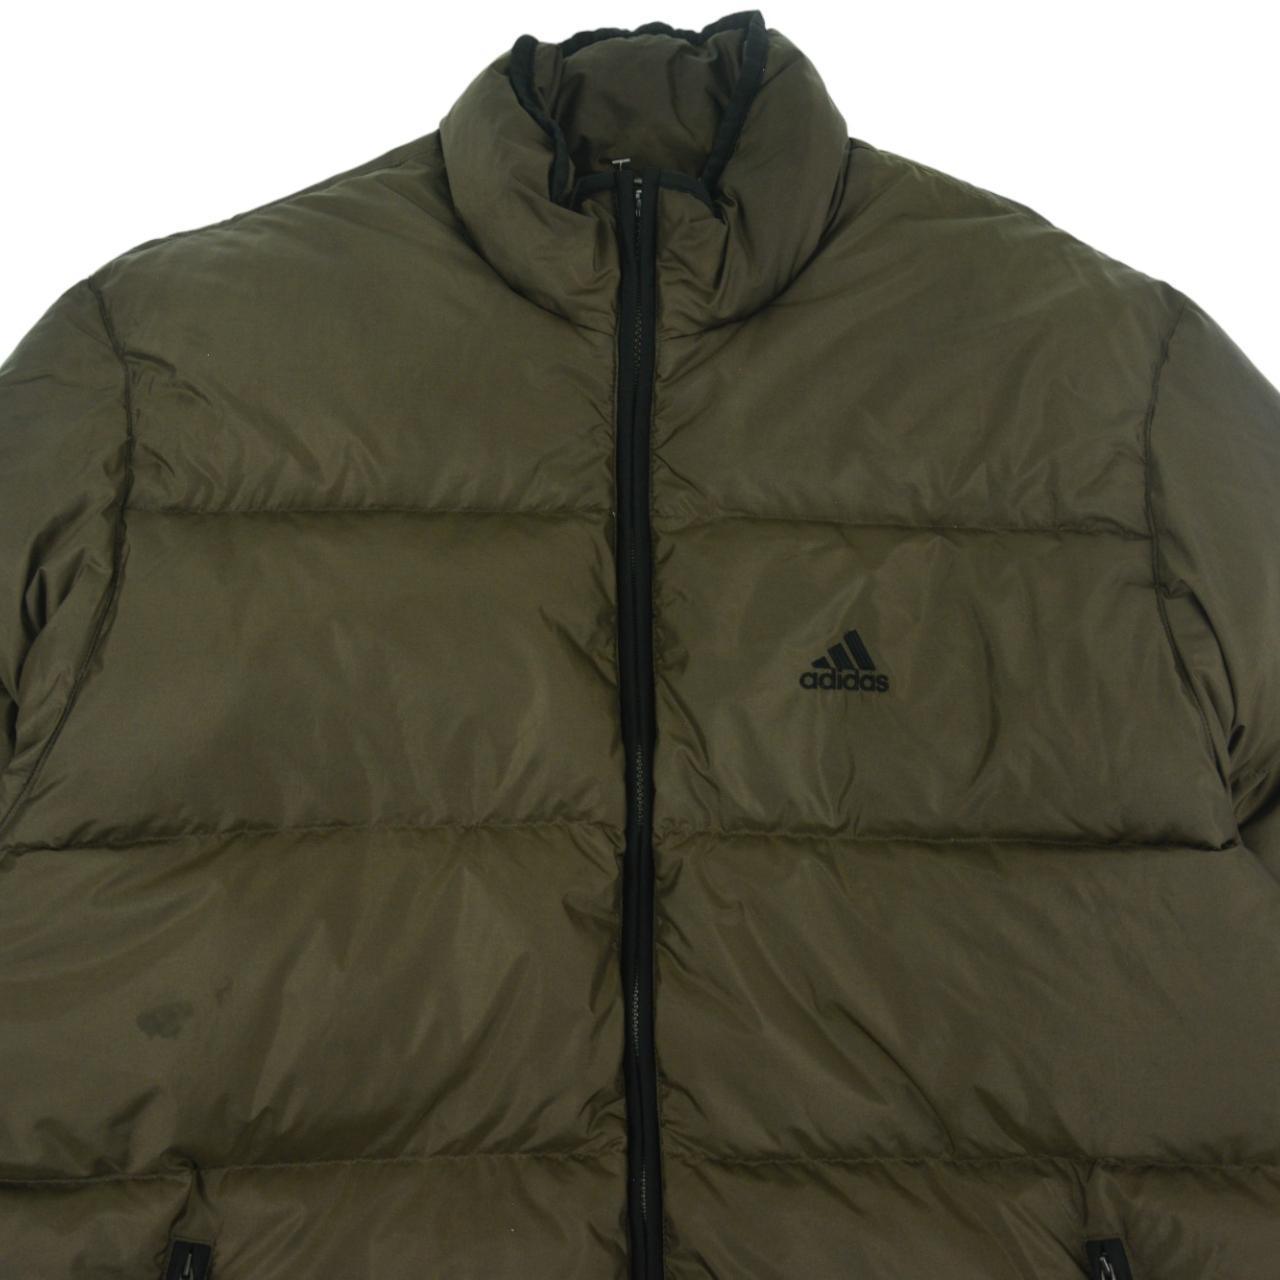 Vintage Adidas Puffer Jacket Size XL - Known Source